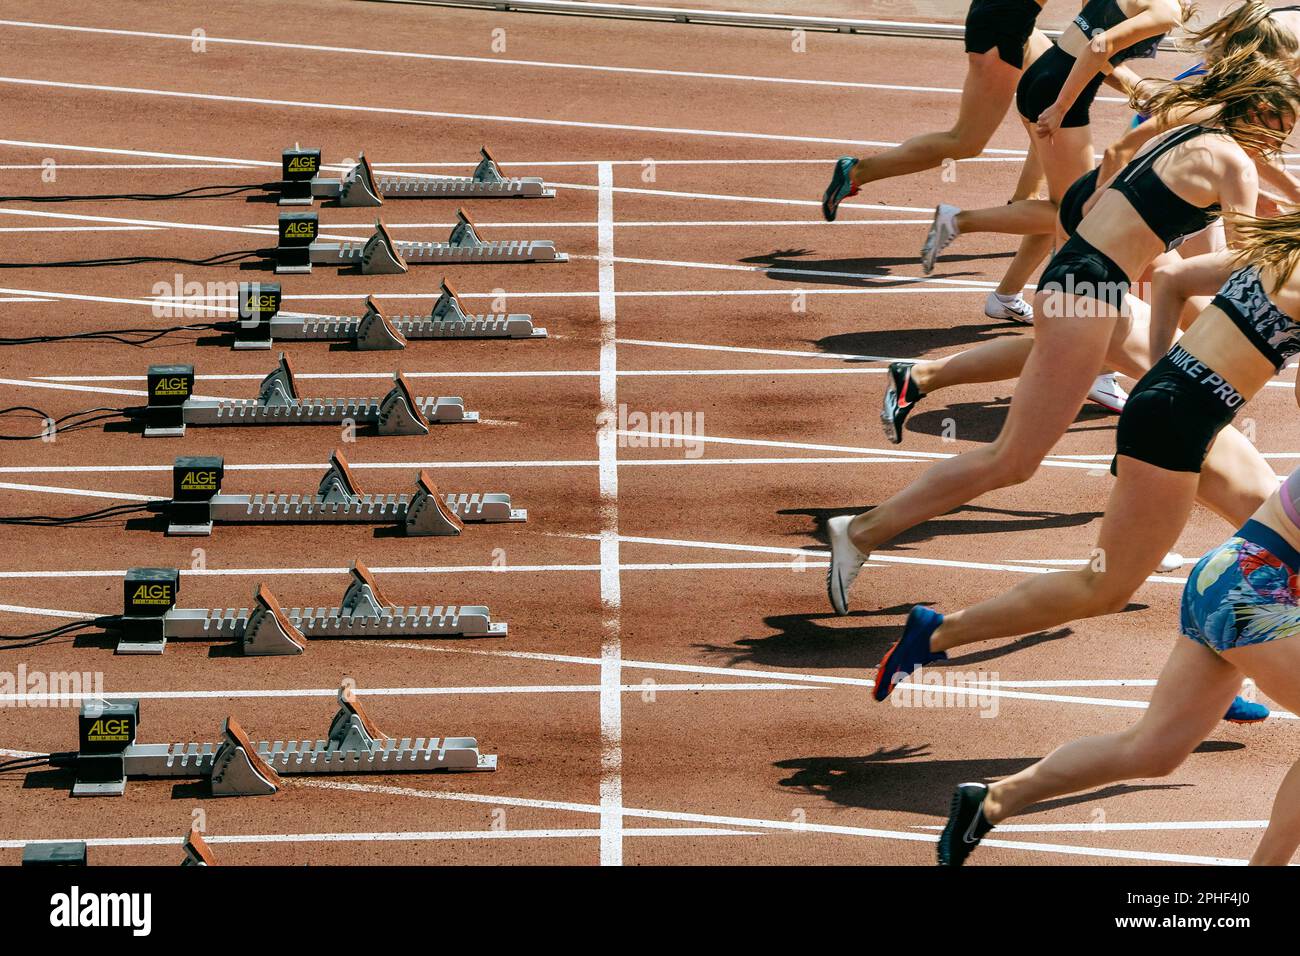 female runners athletes in Nike spikes start race running from starting blocks Alge-Timing, world championship athletics competition, sports editorial Stock Photo